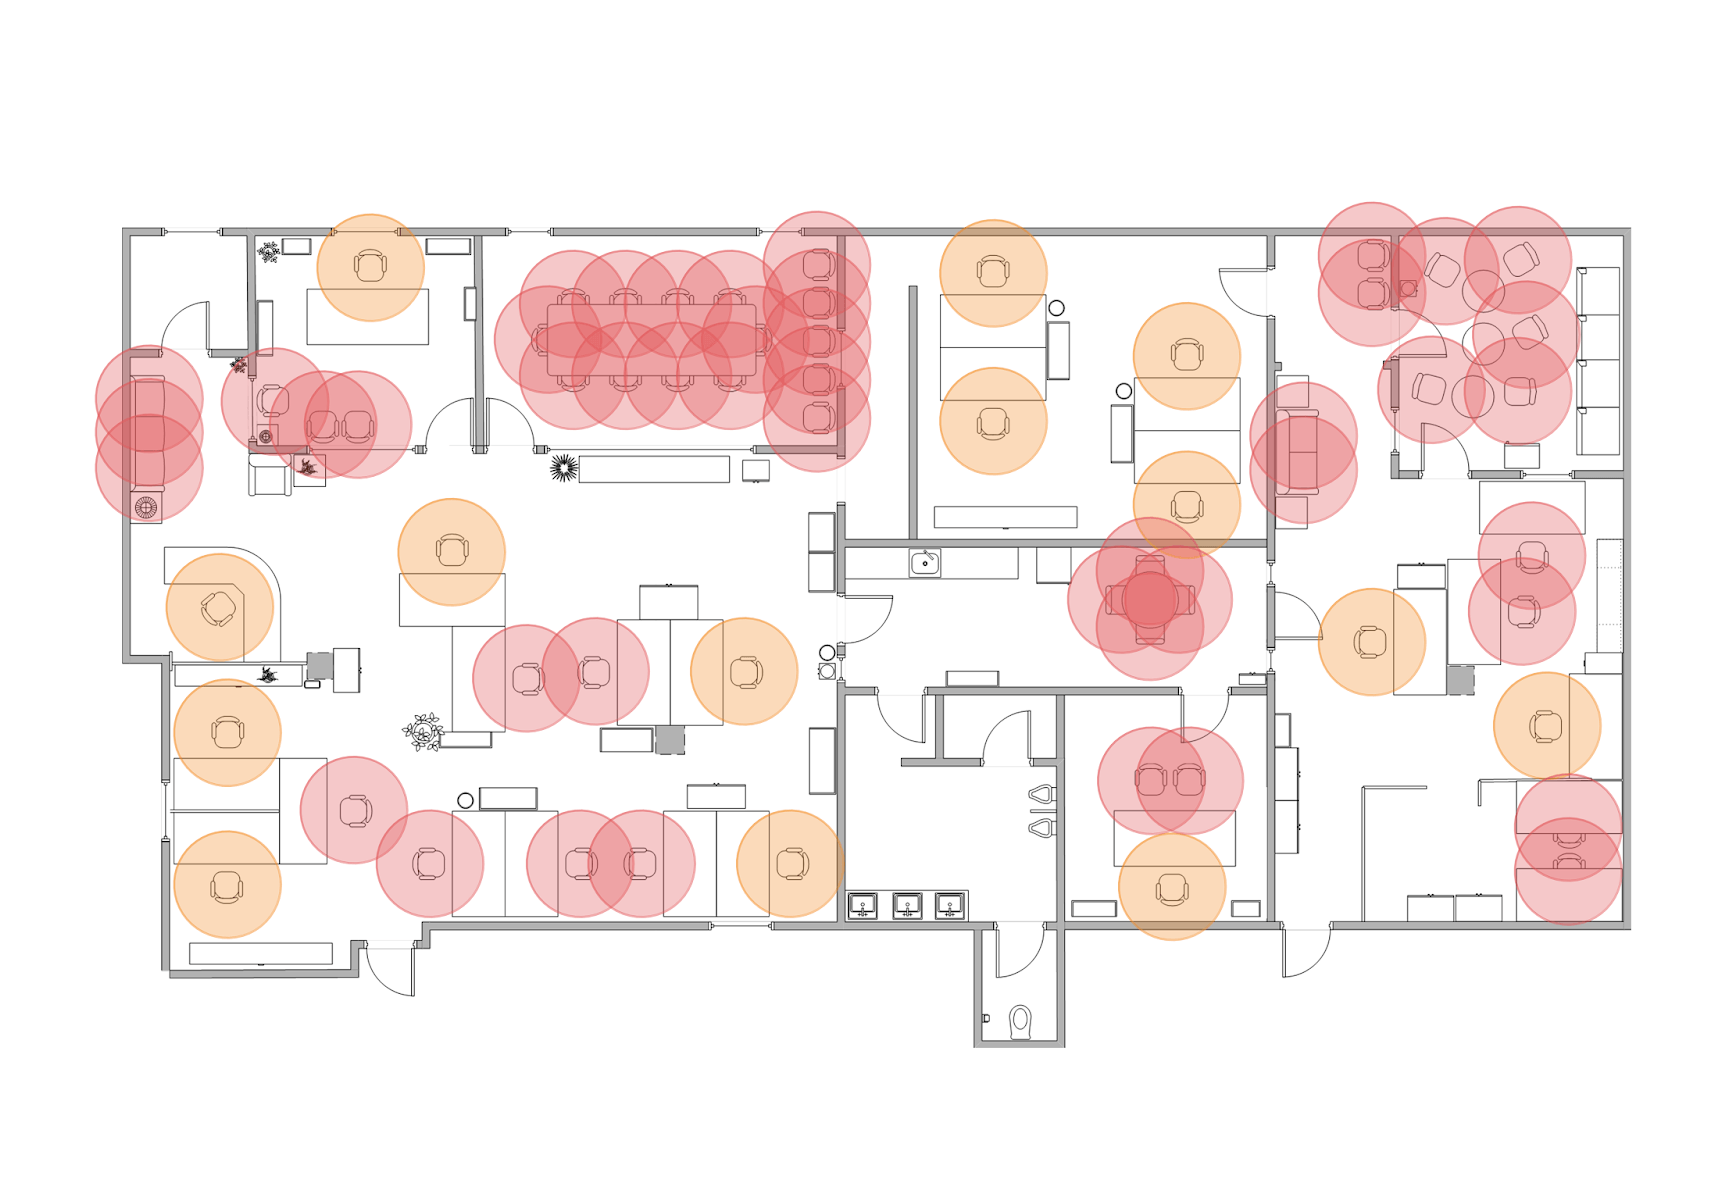 Visualization of floor plan during Covid-19